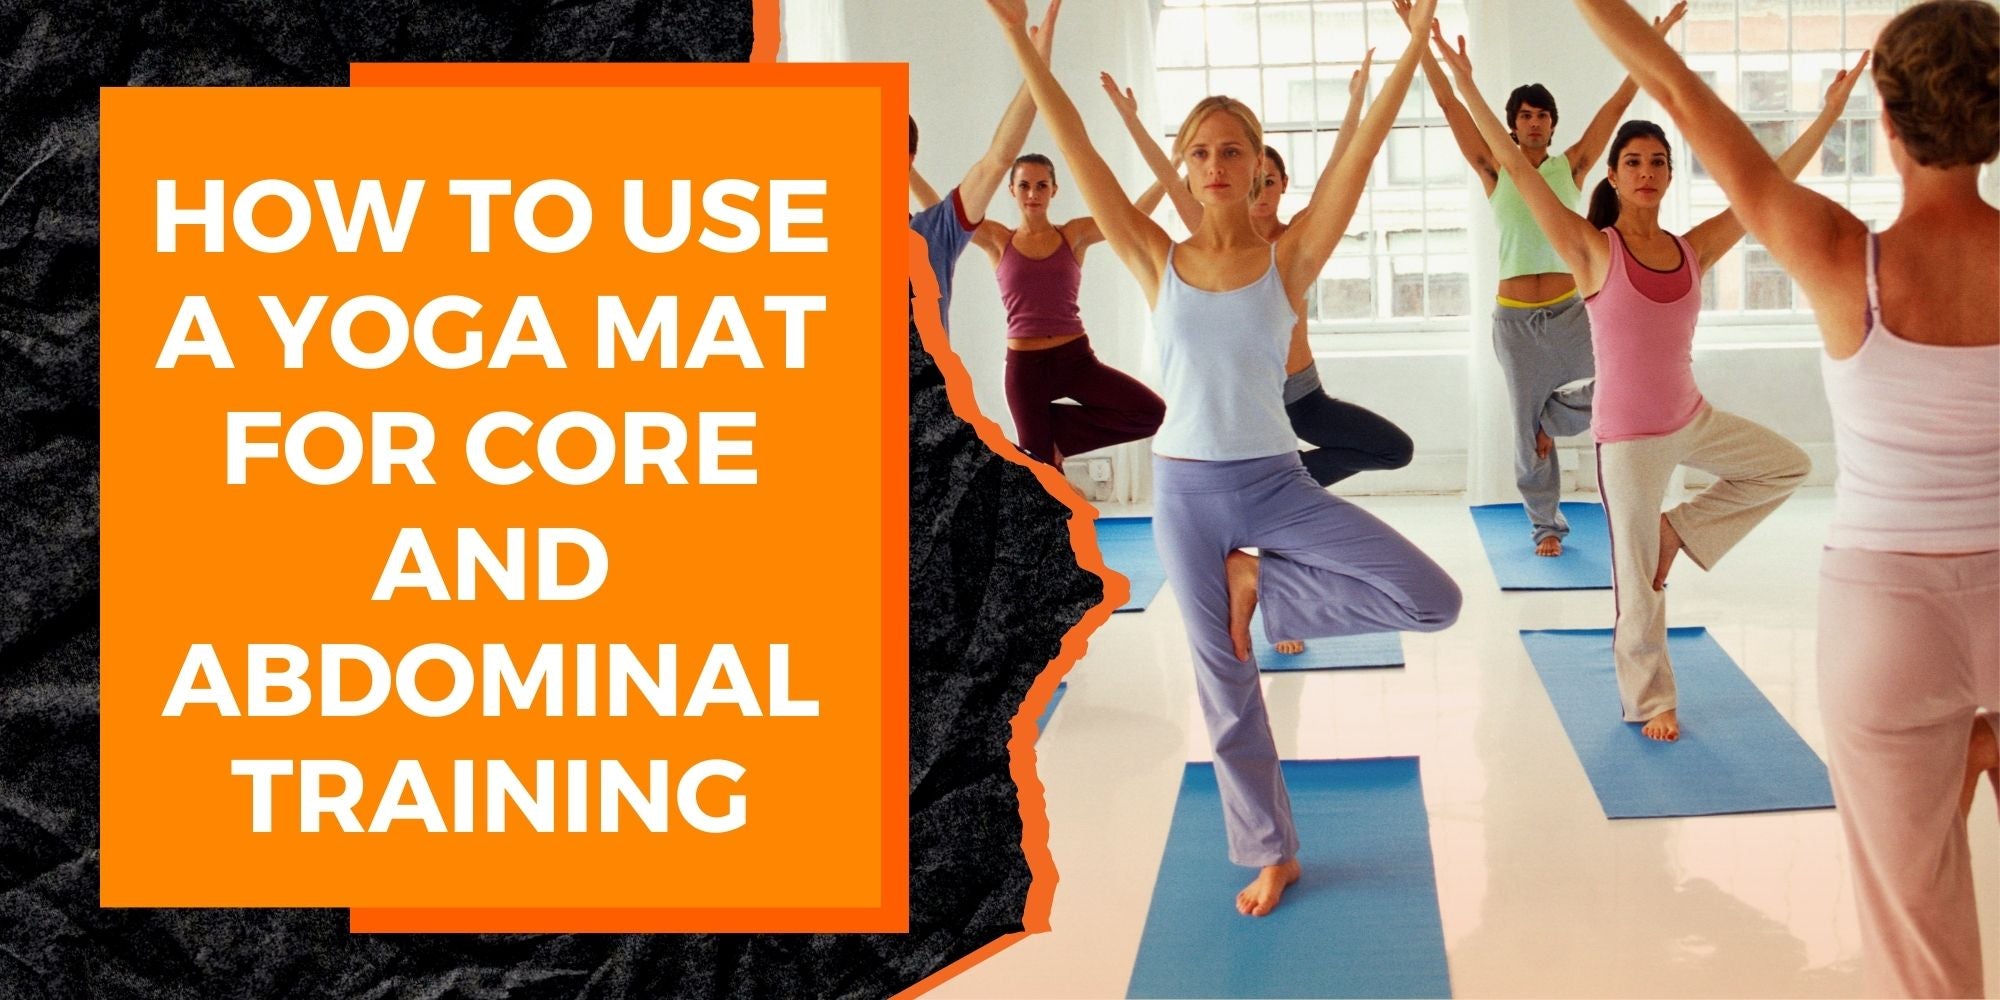 How to Use a Yoga Mat for Core and Abdominal Training